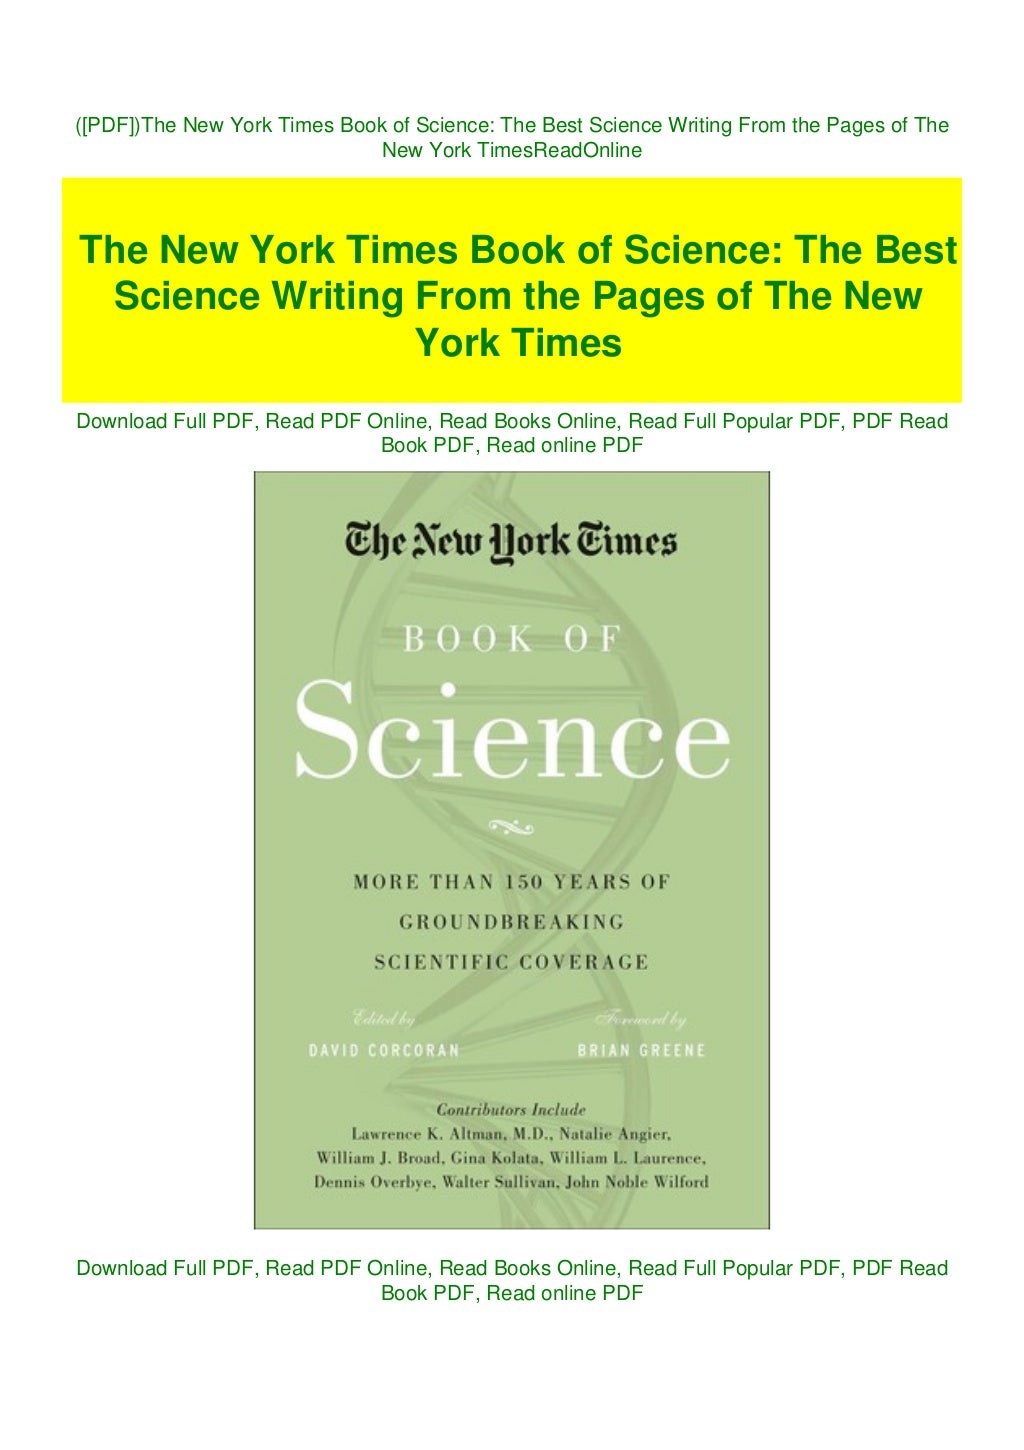 science articles new york times